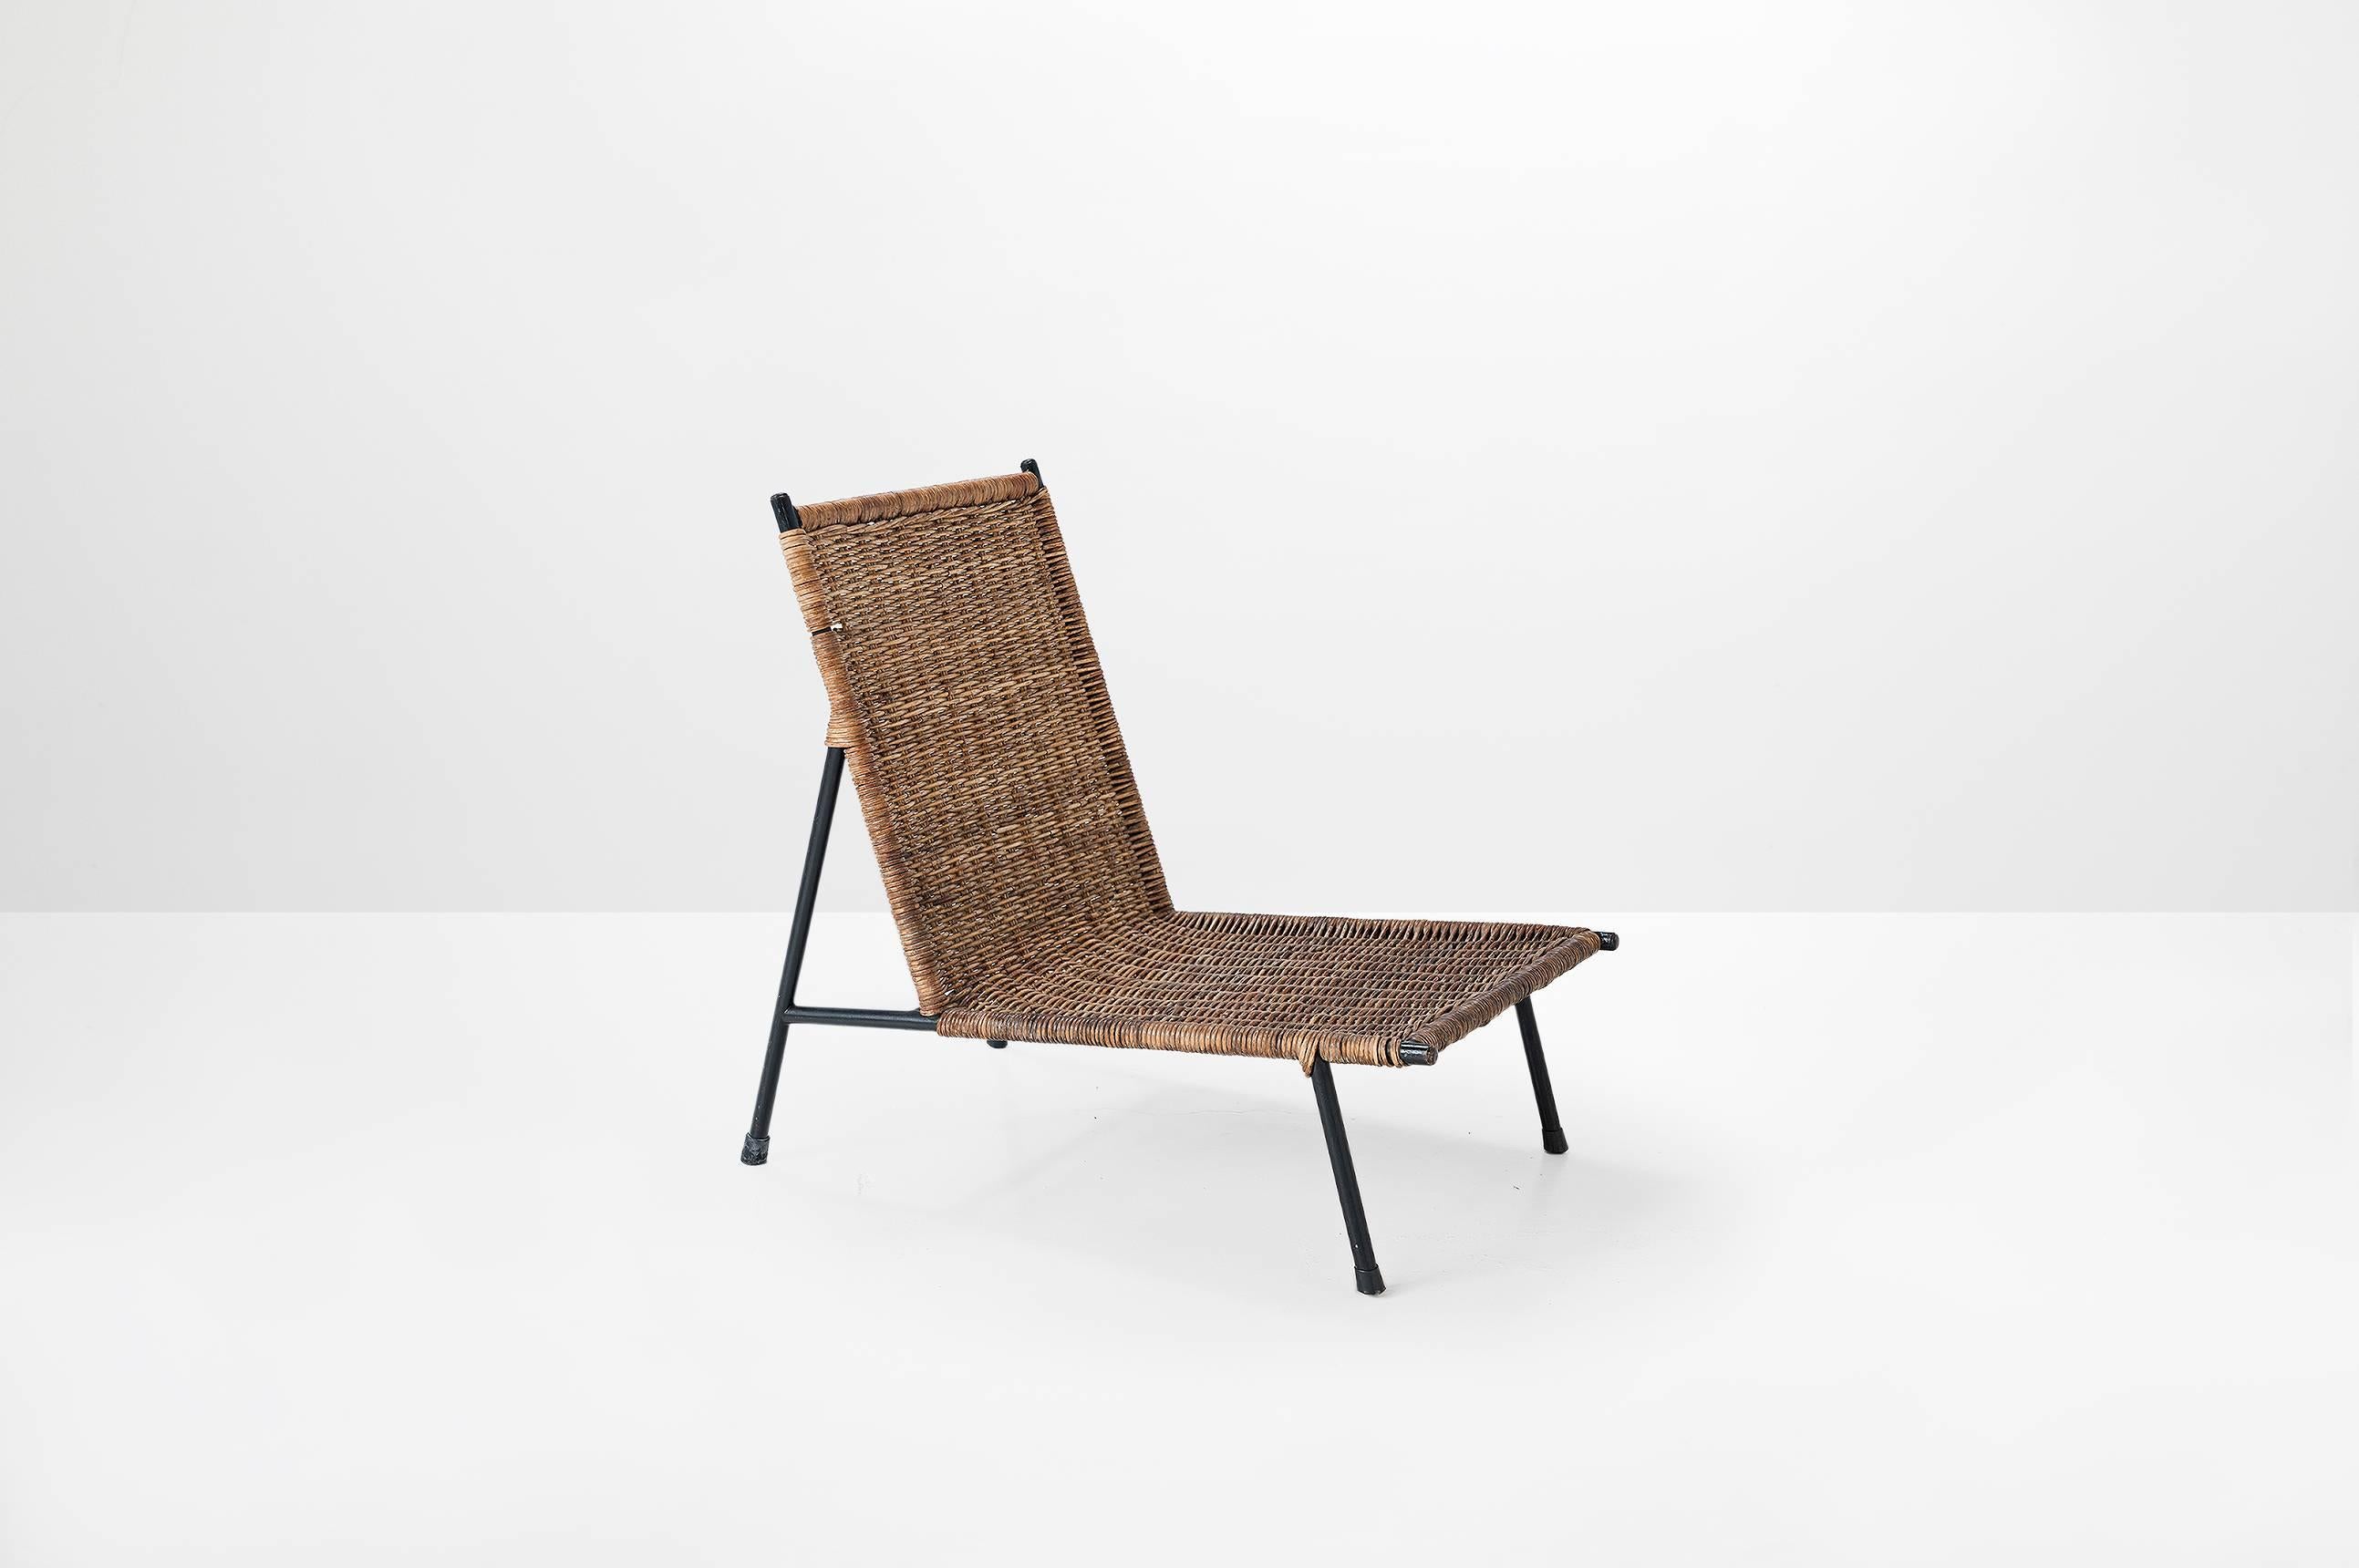 Franco Campo & Carlo Graffi

Pair of armchairs
Manufactured by Campo & Graffi
Italy, 1955
Iron structure, wicker

Measurements
86 cm x 56 cm x 78 H cm
33.8 in x 22 in x 30,7 H in

Provenance
Private collection,